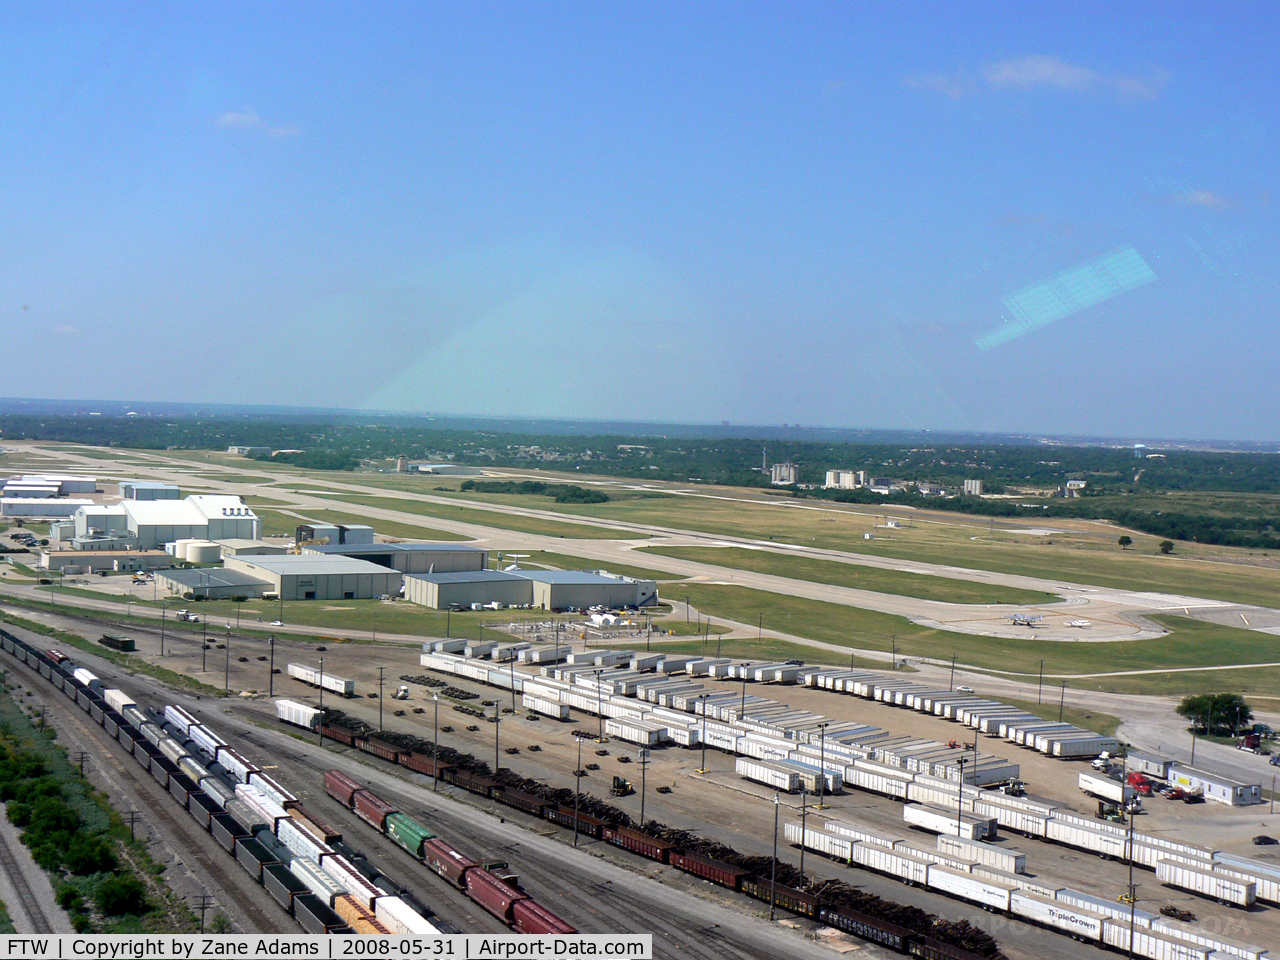 Fort Worth Meacham International Airport (FTW) - On base for runway 16 at Meacham Field